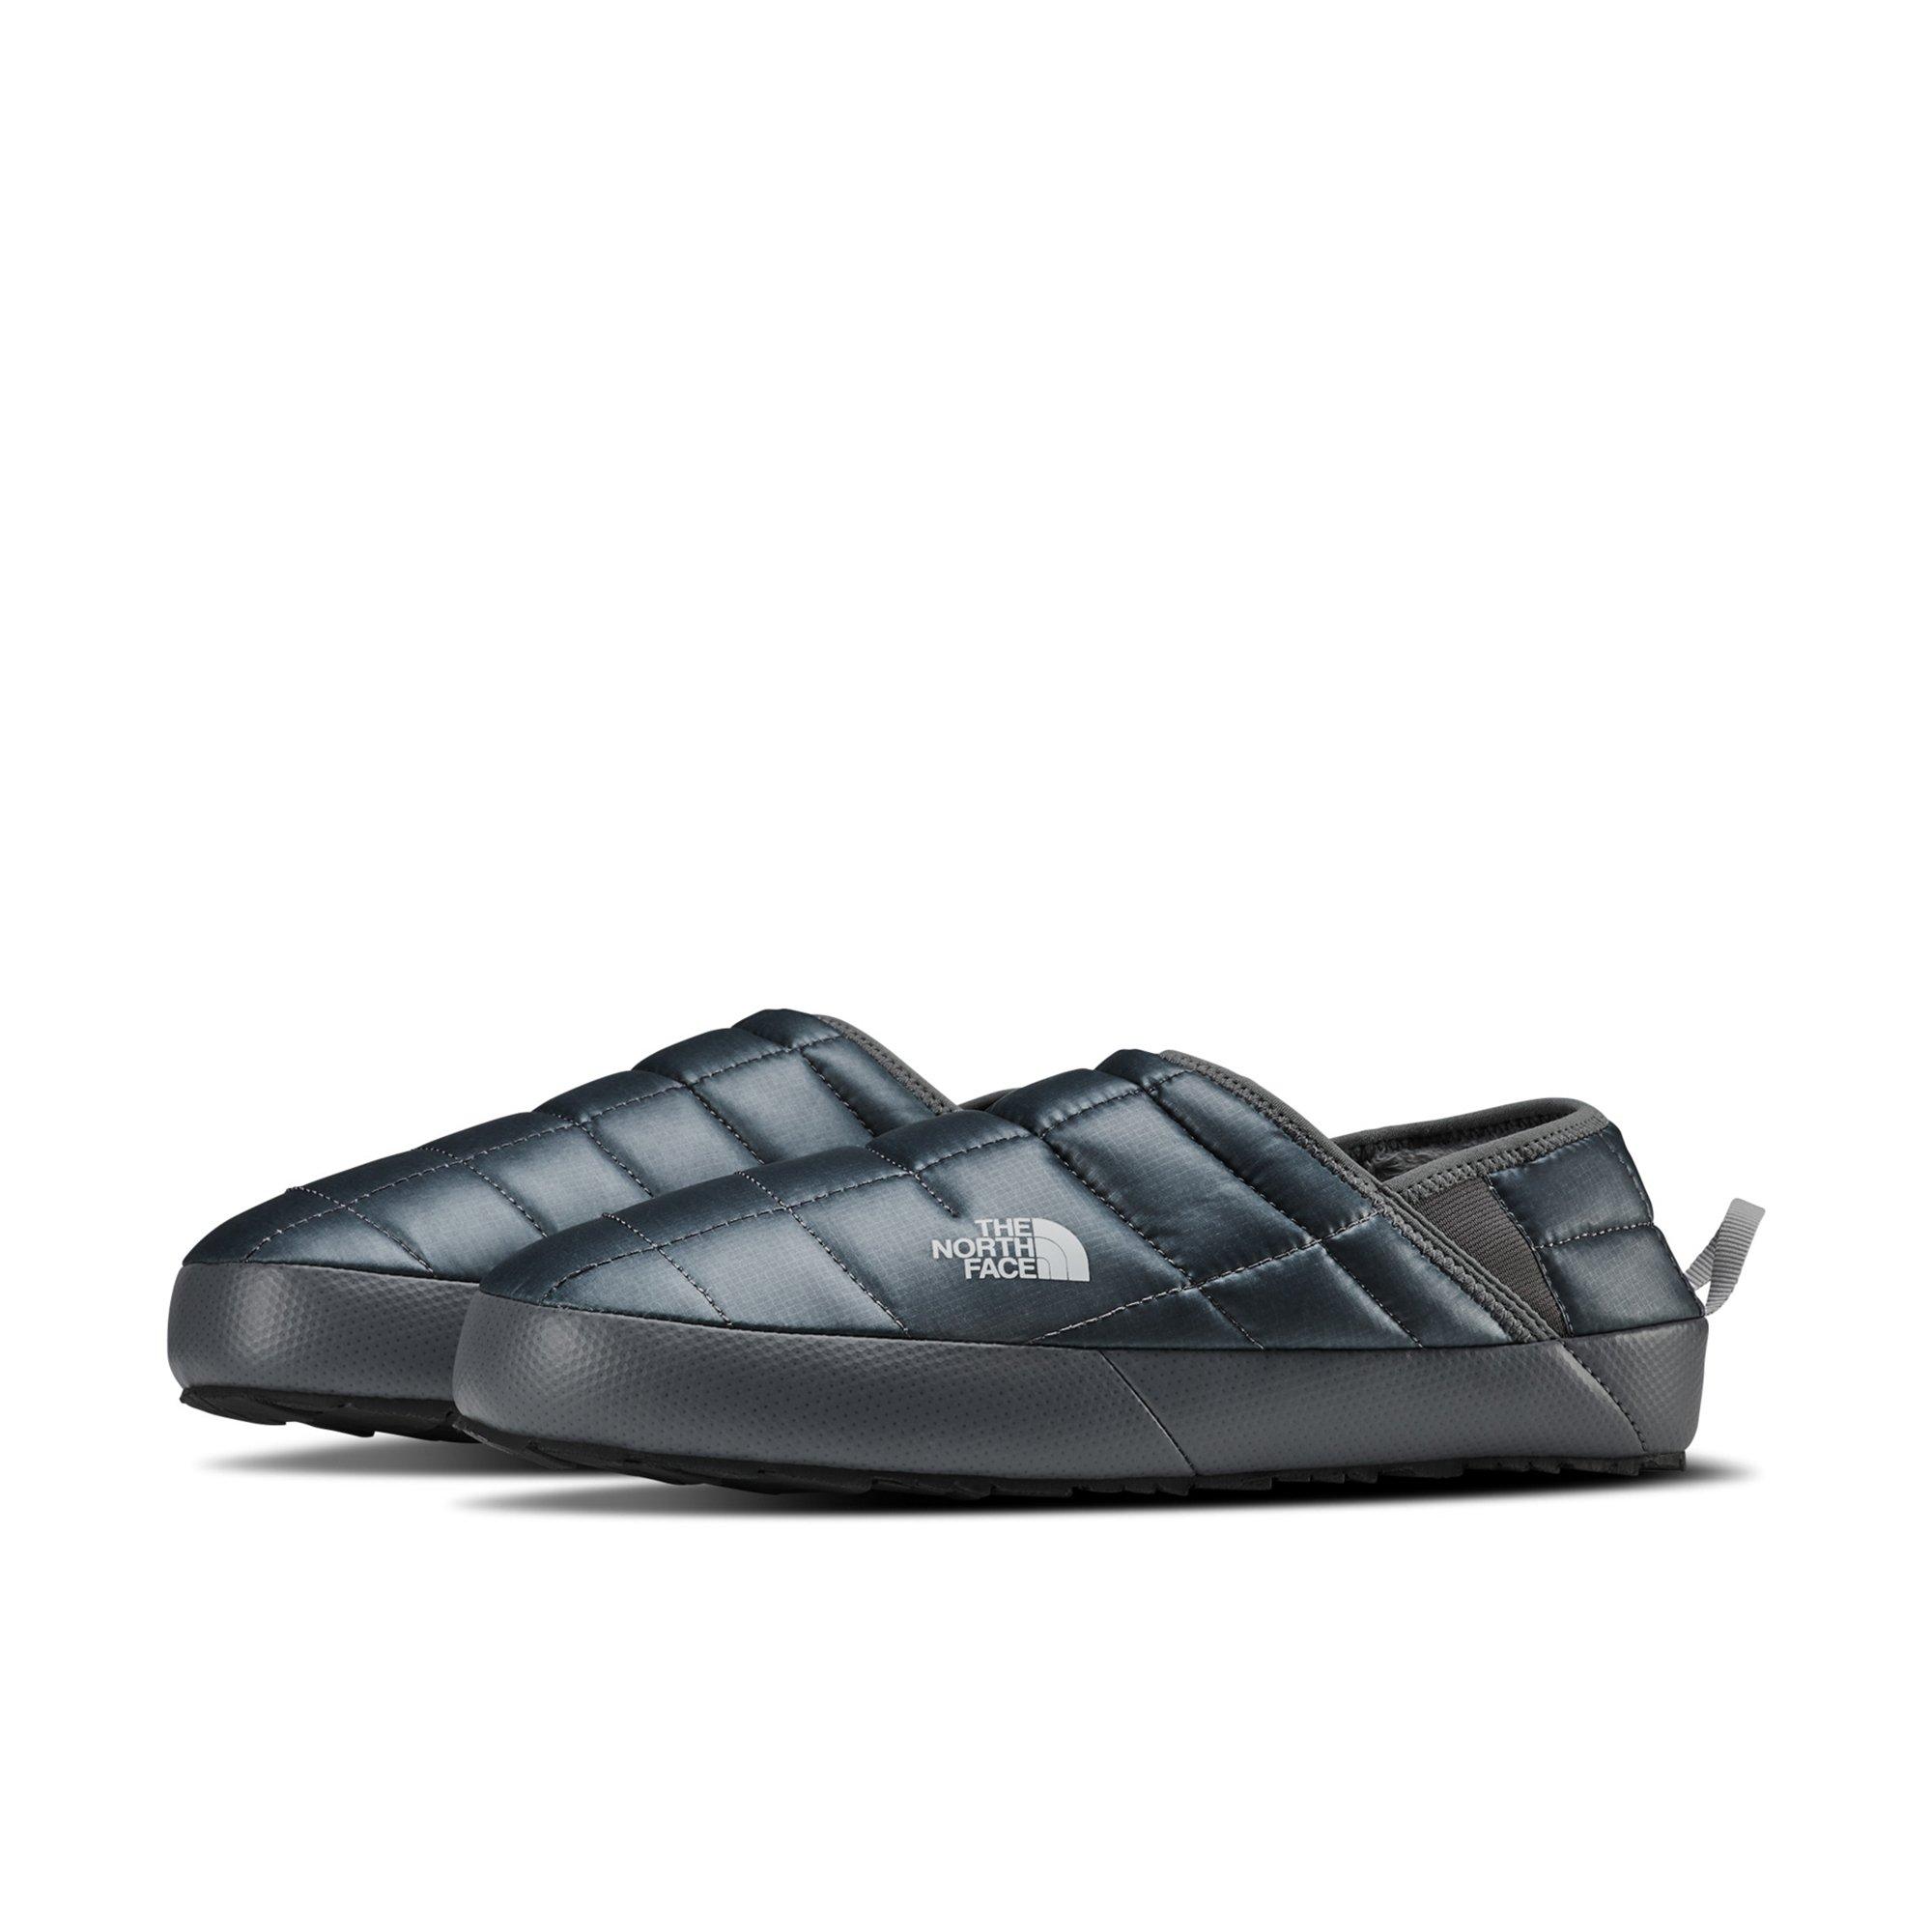 north face men's thermoball slippers